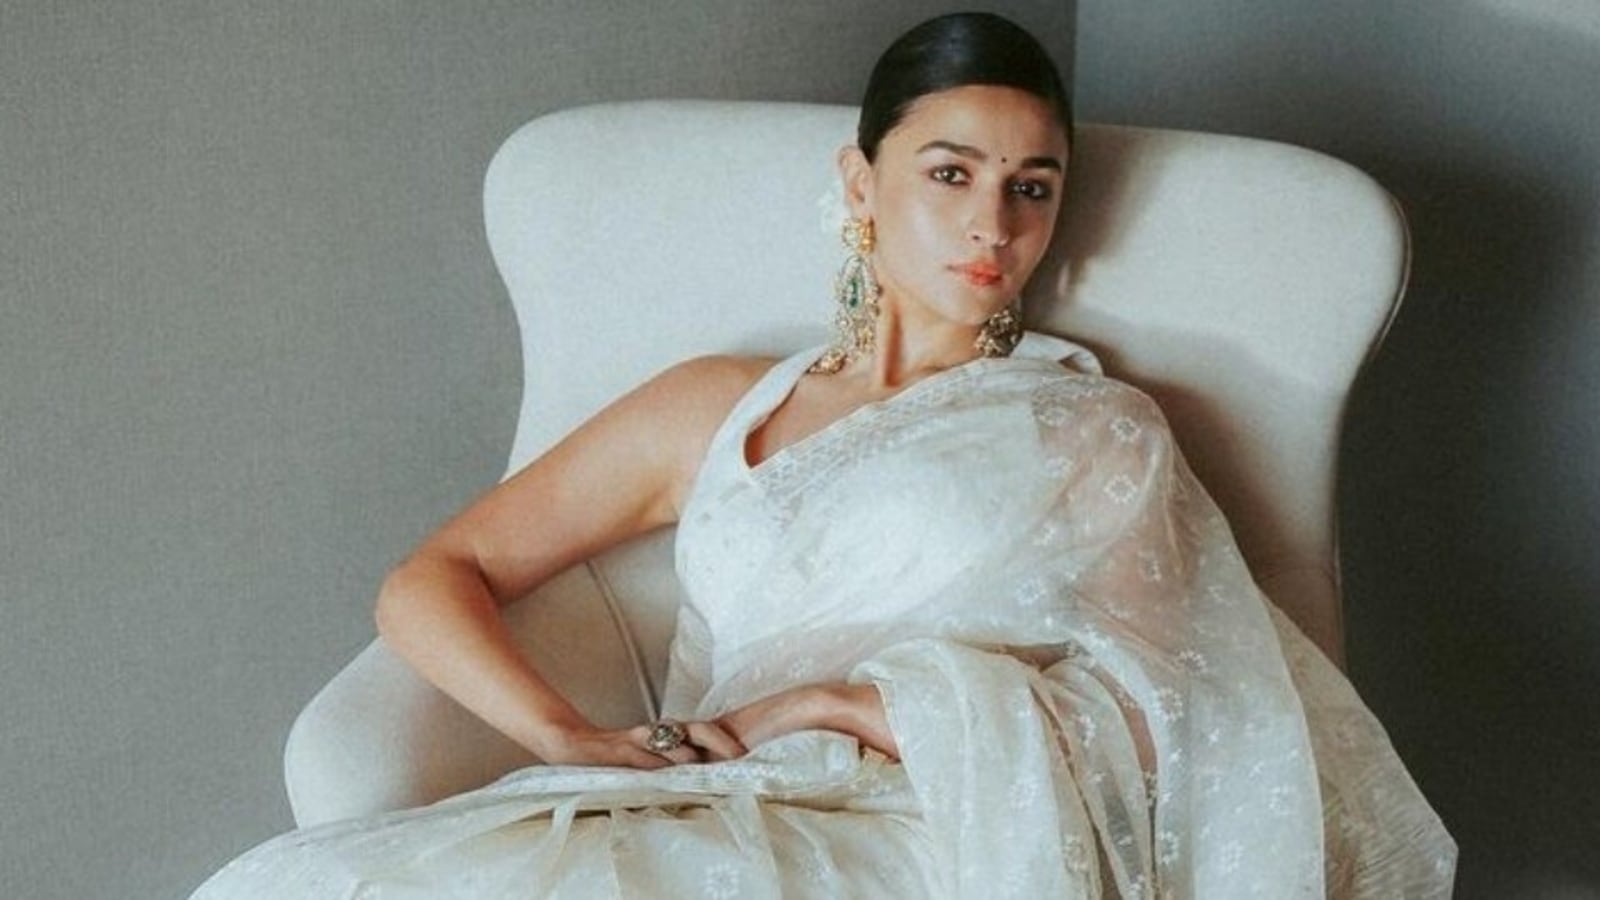 Alia Bhatt stuns in another white saree for Gangubai Kathiawadi promotions, her earrings are unmissable